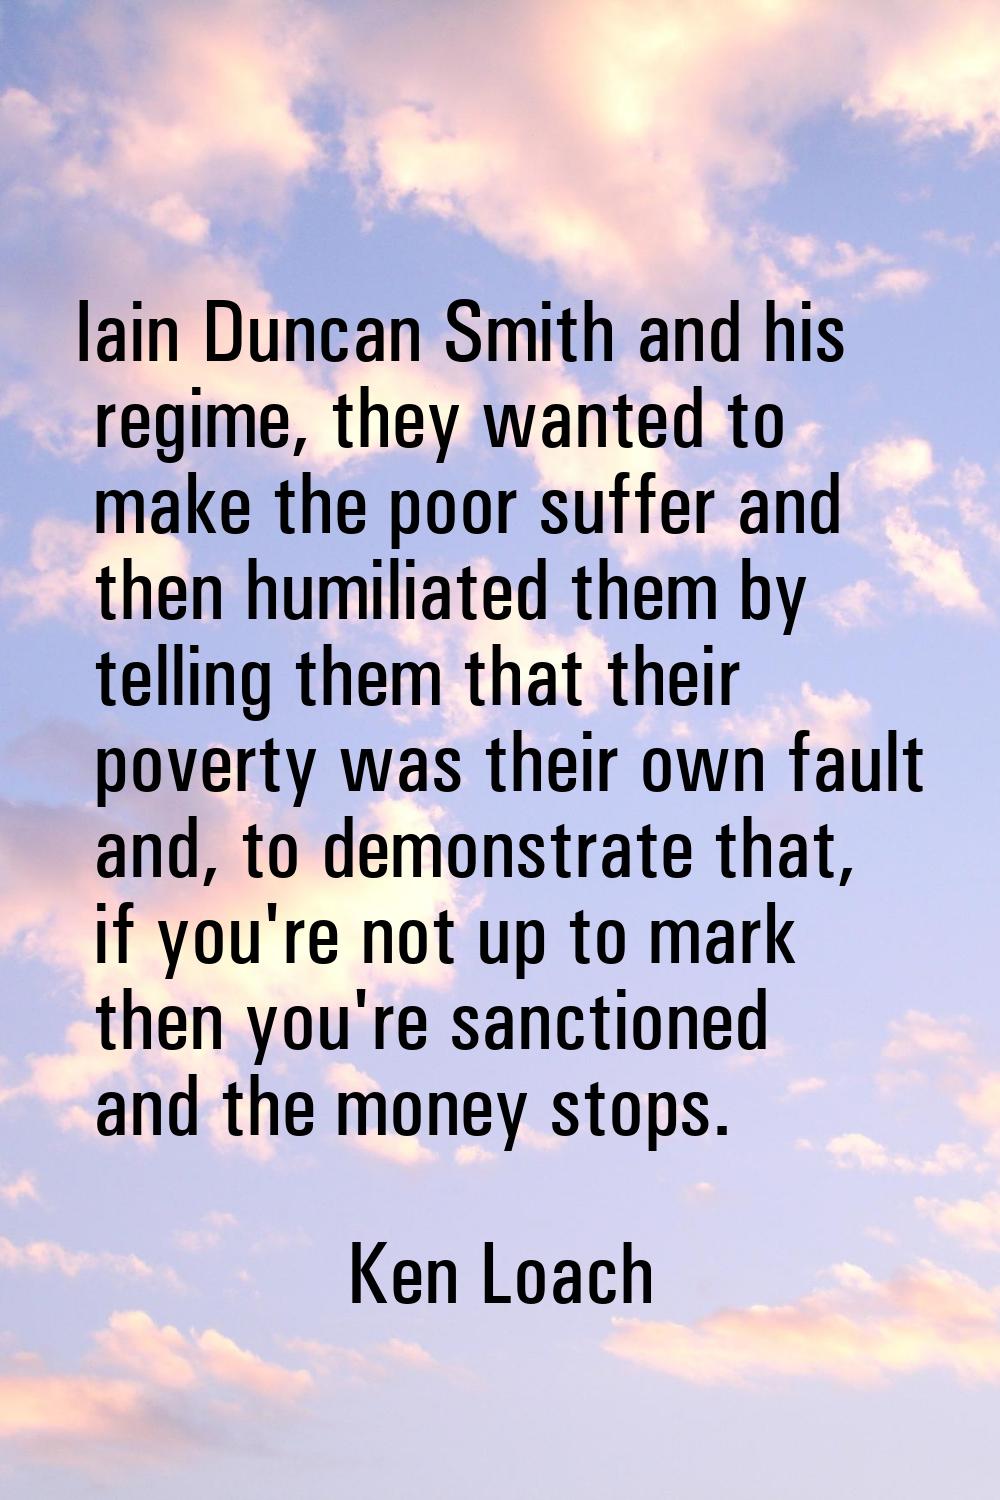 Iain Duncan Smith and his regime, they wanted to make the poor suffer and then humiliated them by t